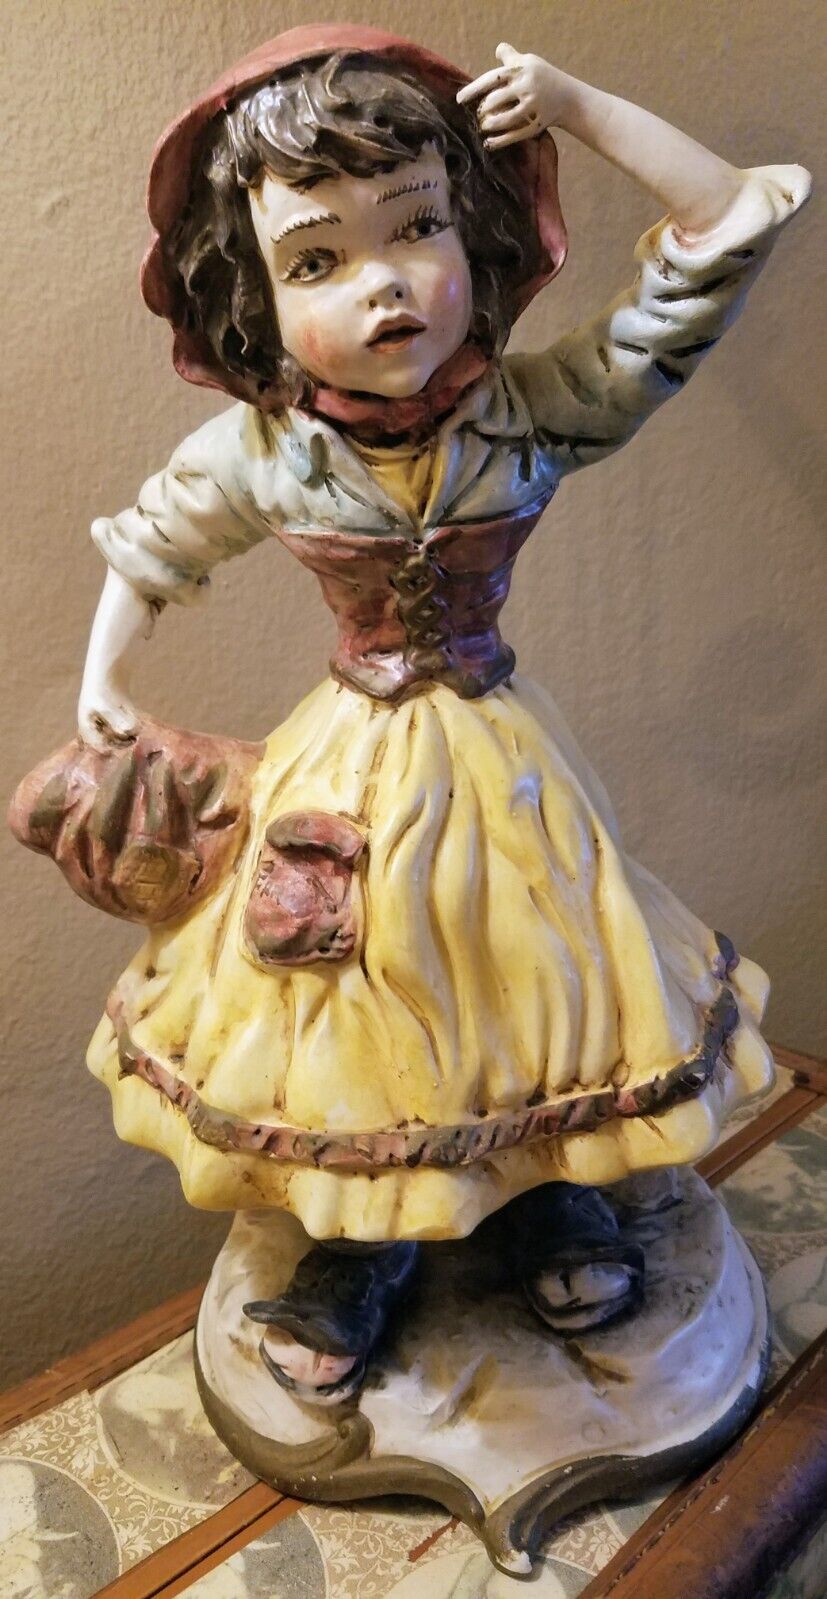 *Clearance*VINTAGE LG CAPODIMONTE Peasant/Hobo Girl Porcelain Figure ITALY 14\